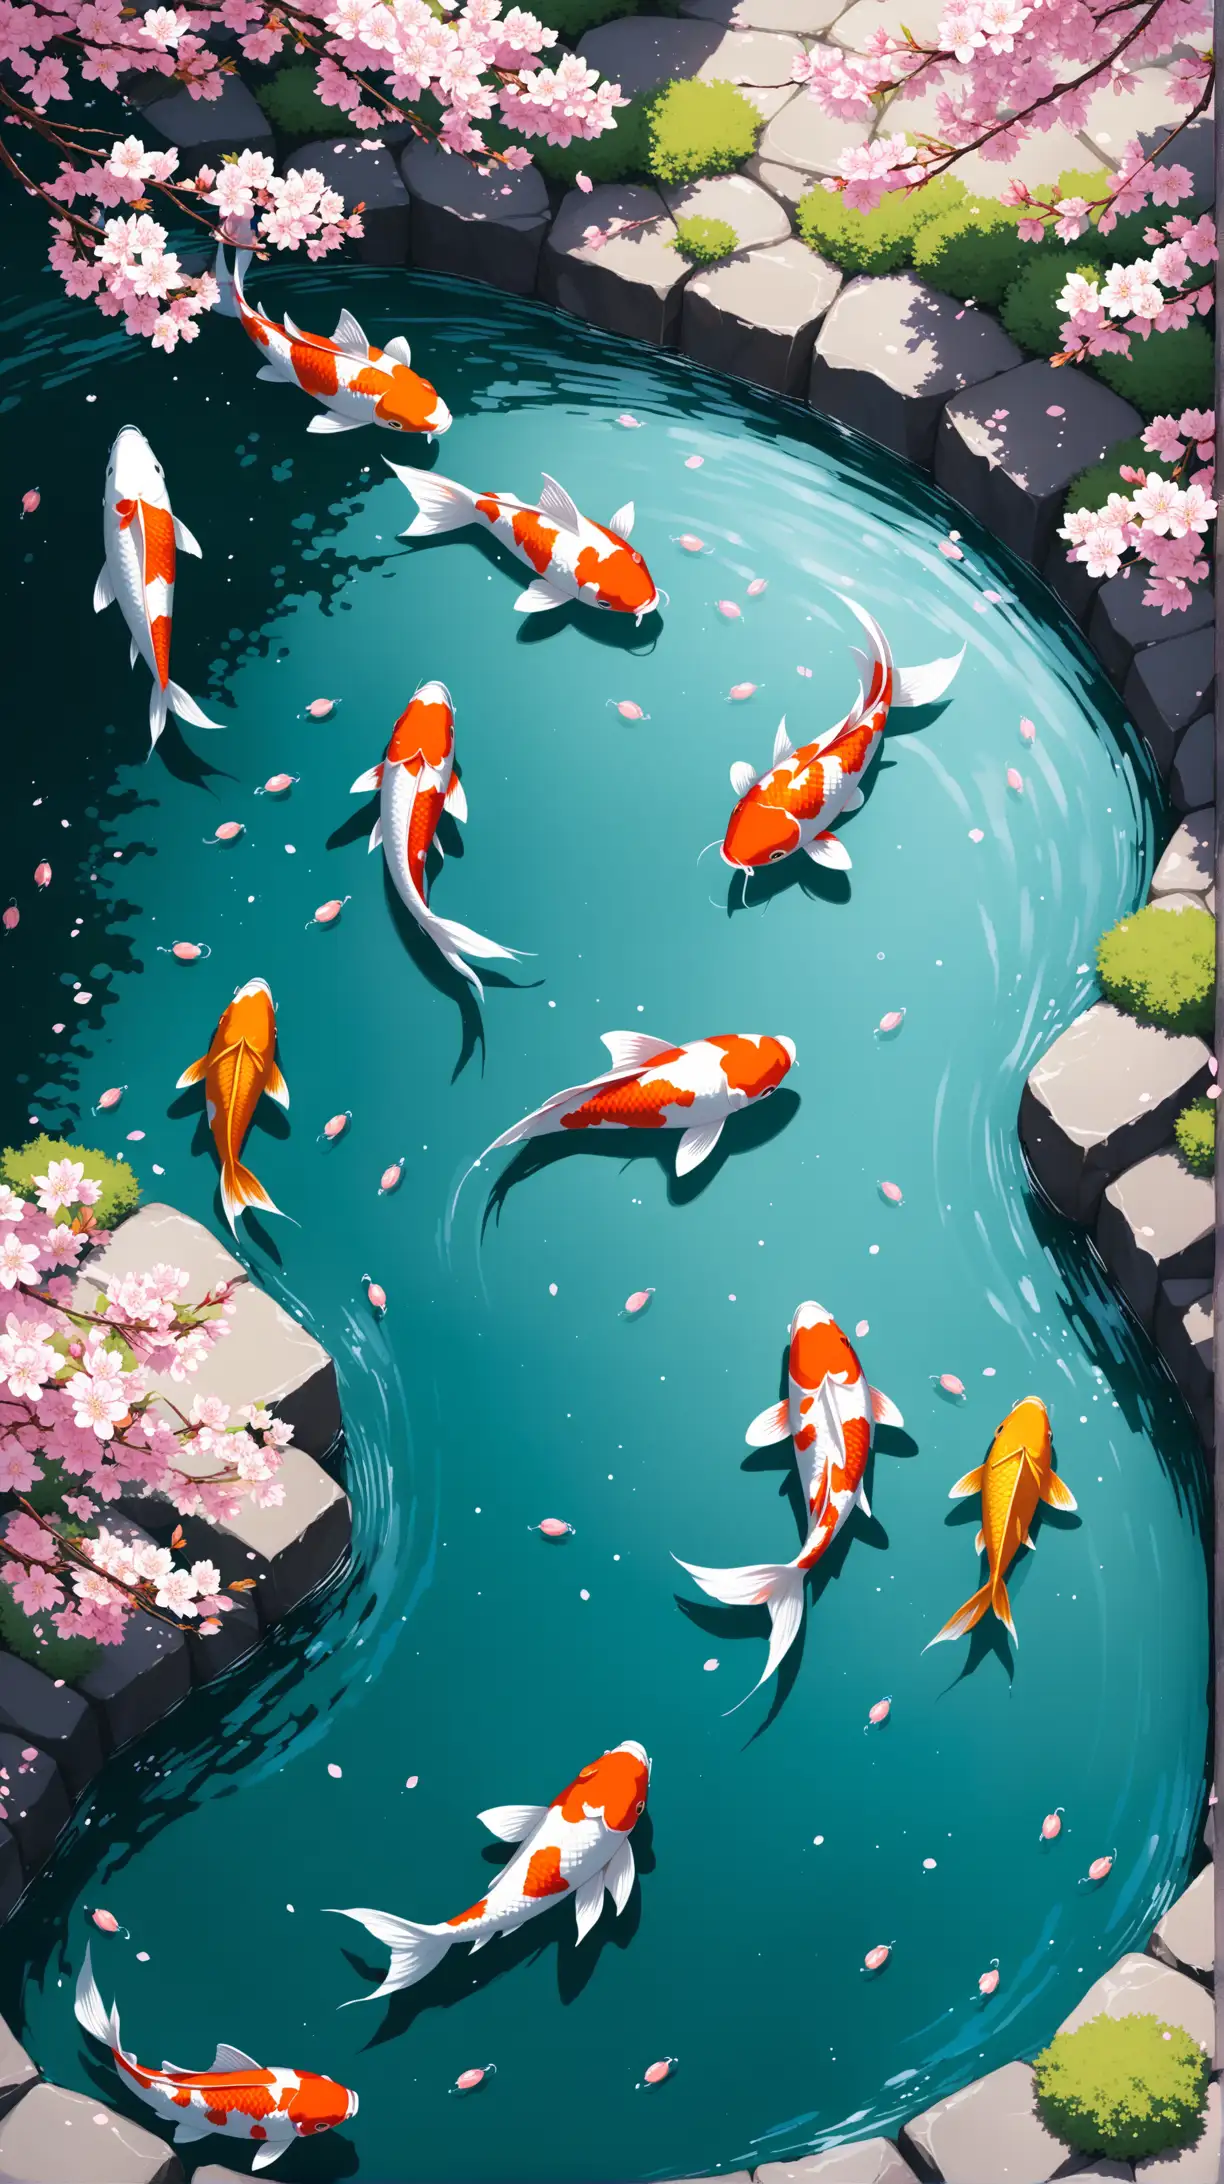 Japanese Koi Fish Pond with Falling Cherry Blossoms